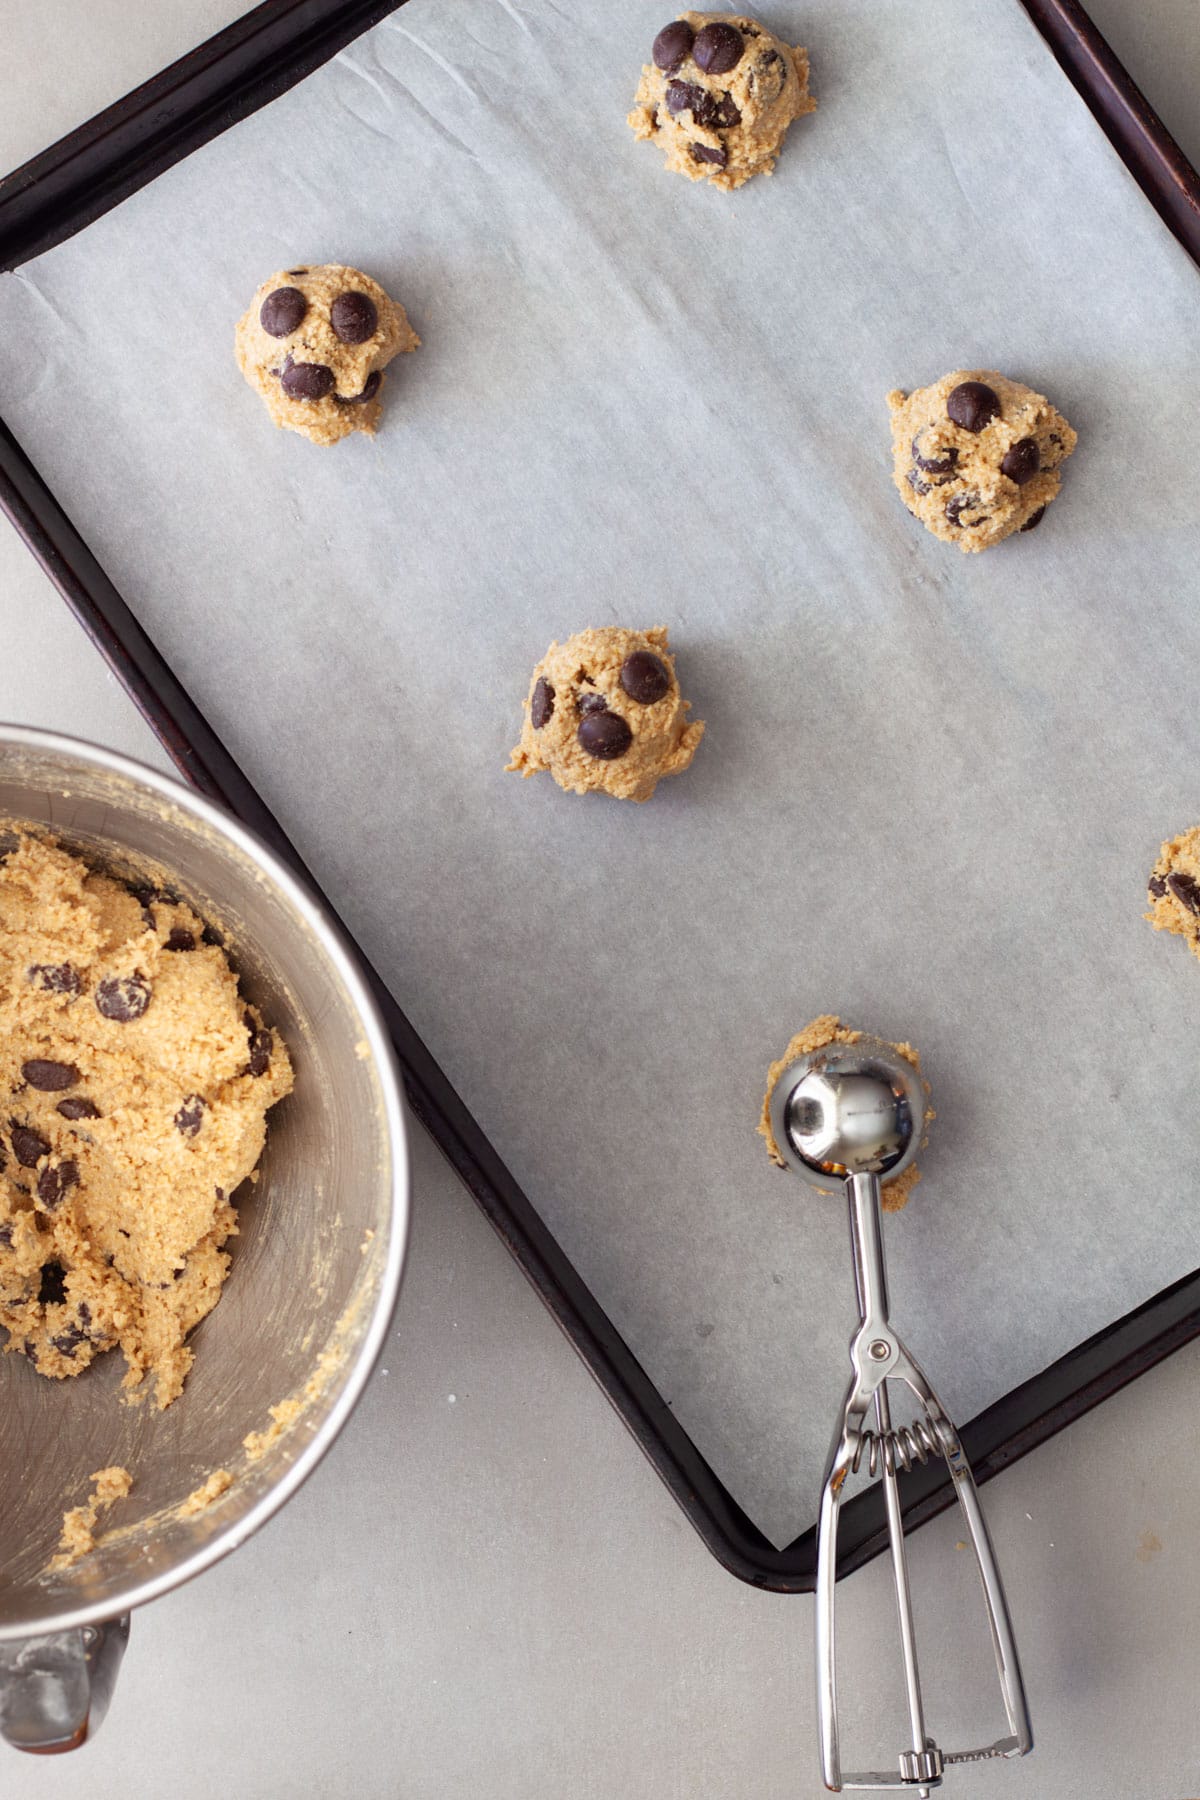 Oat flour chocolate chip cookie dough getting scooped and placed on a parchment lined baking sheet.